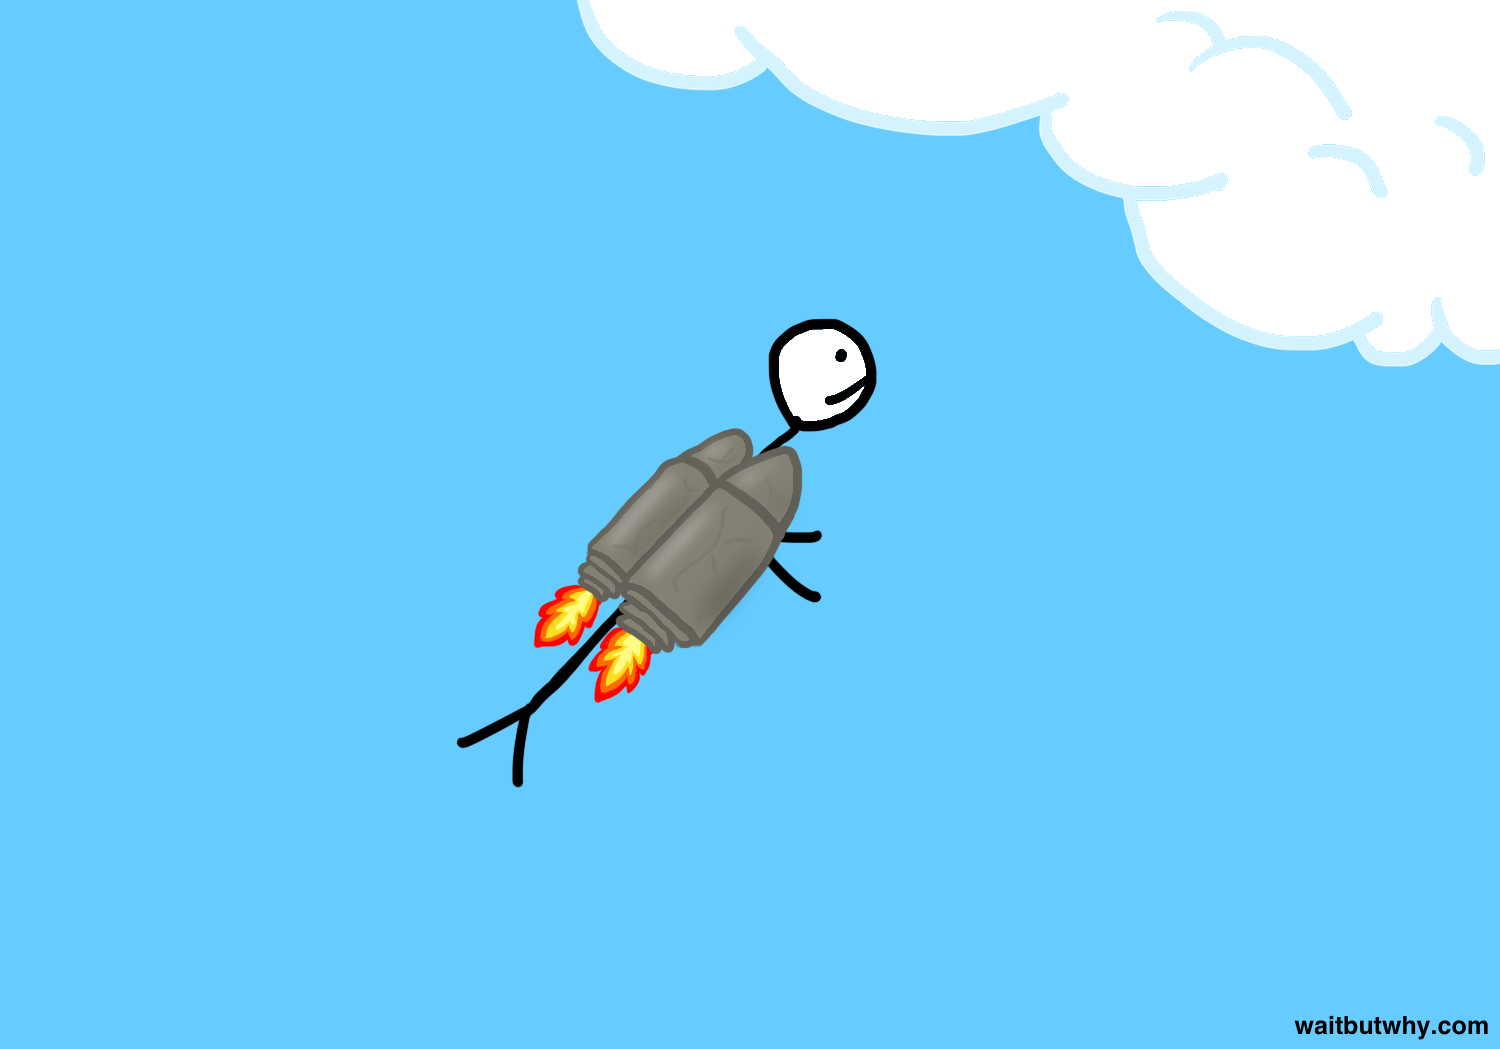 stick figuring rocketing through sky with jet pack made of clay